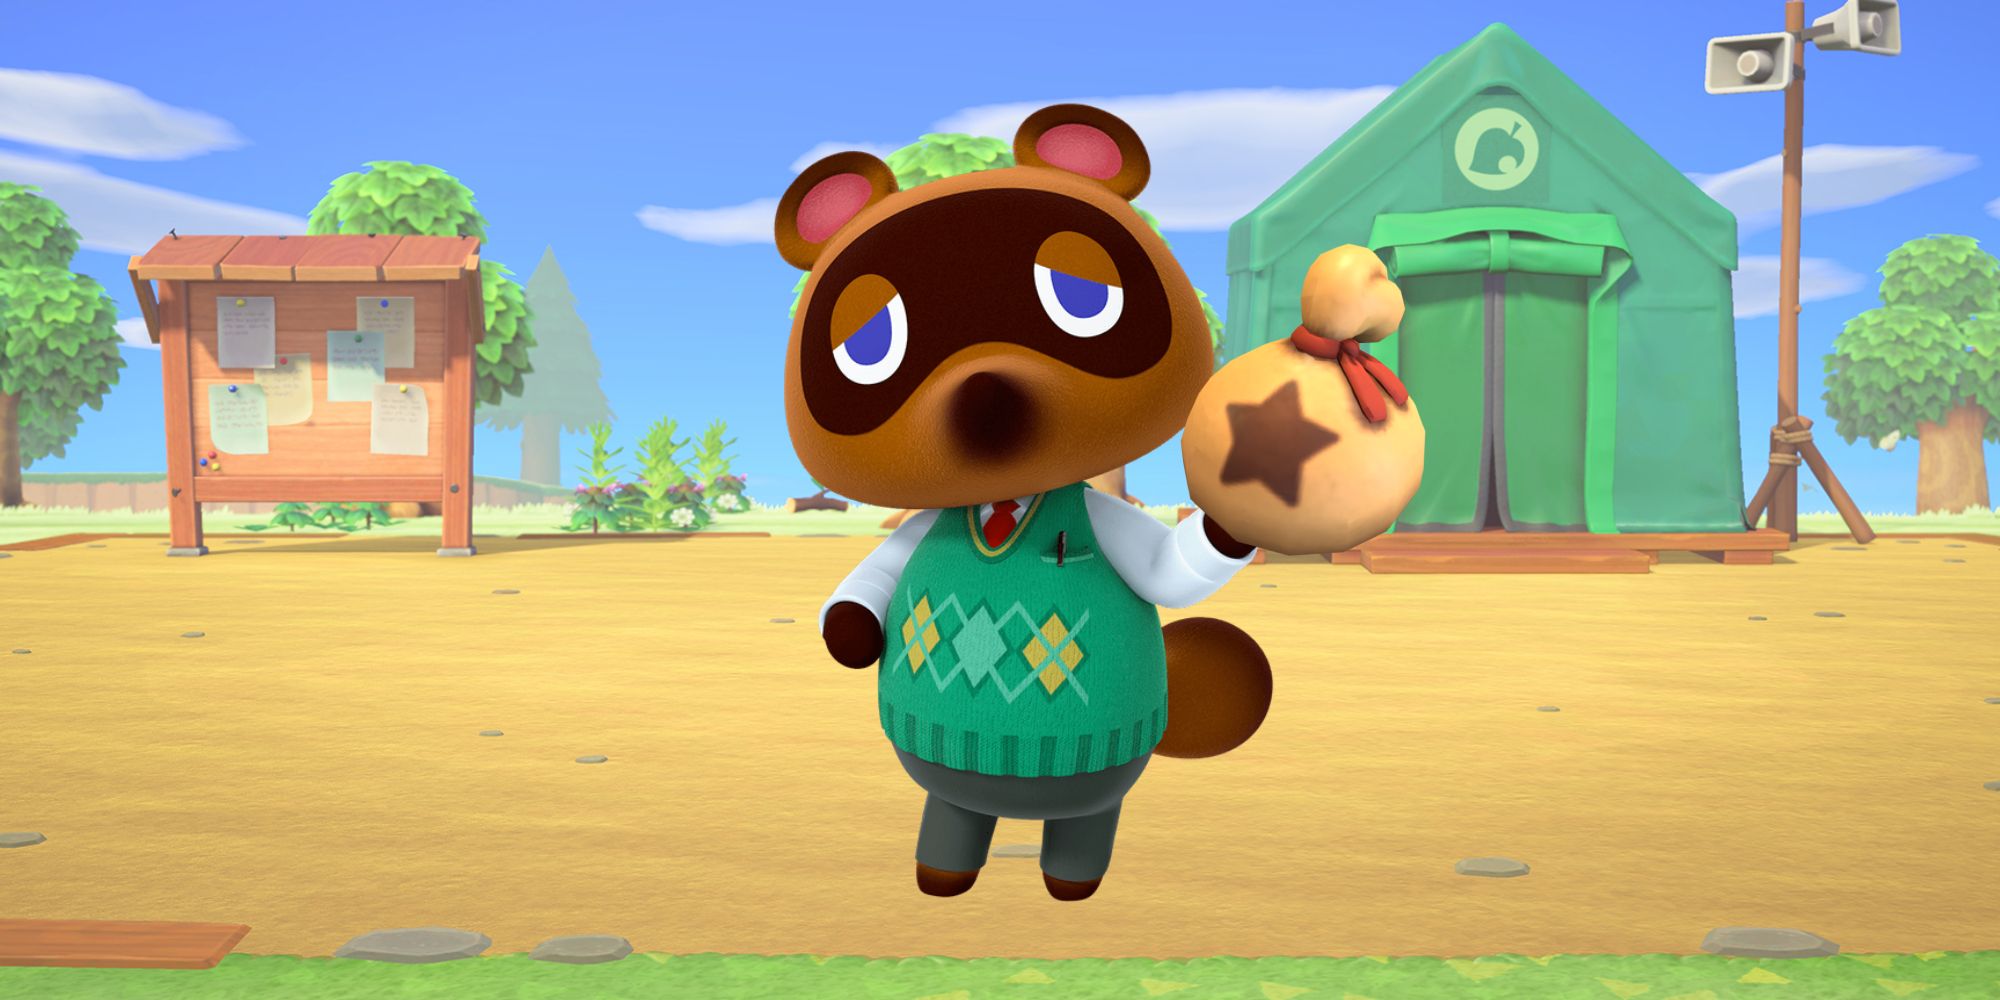 Fictional Currencies a wide shot of Tom Nook from Animal Crossing holding a bag of bells on an island in front of a green tent